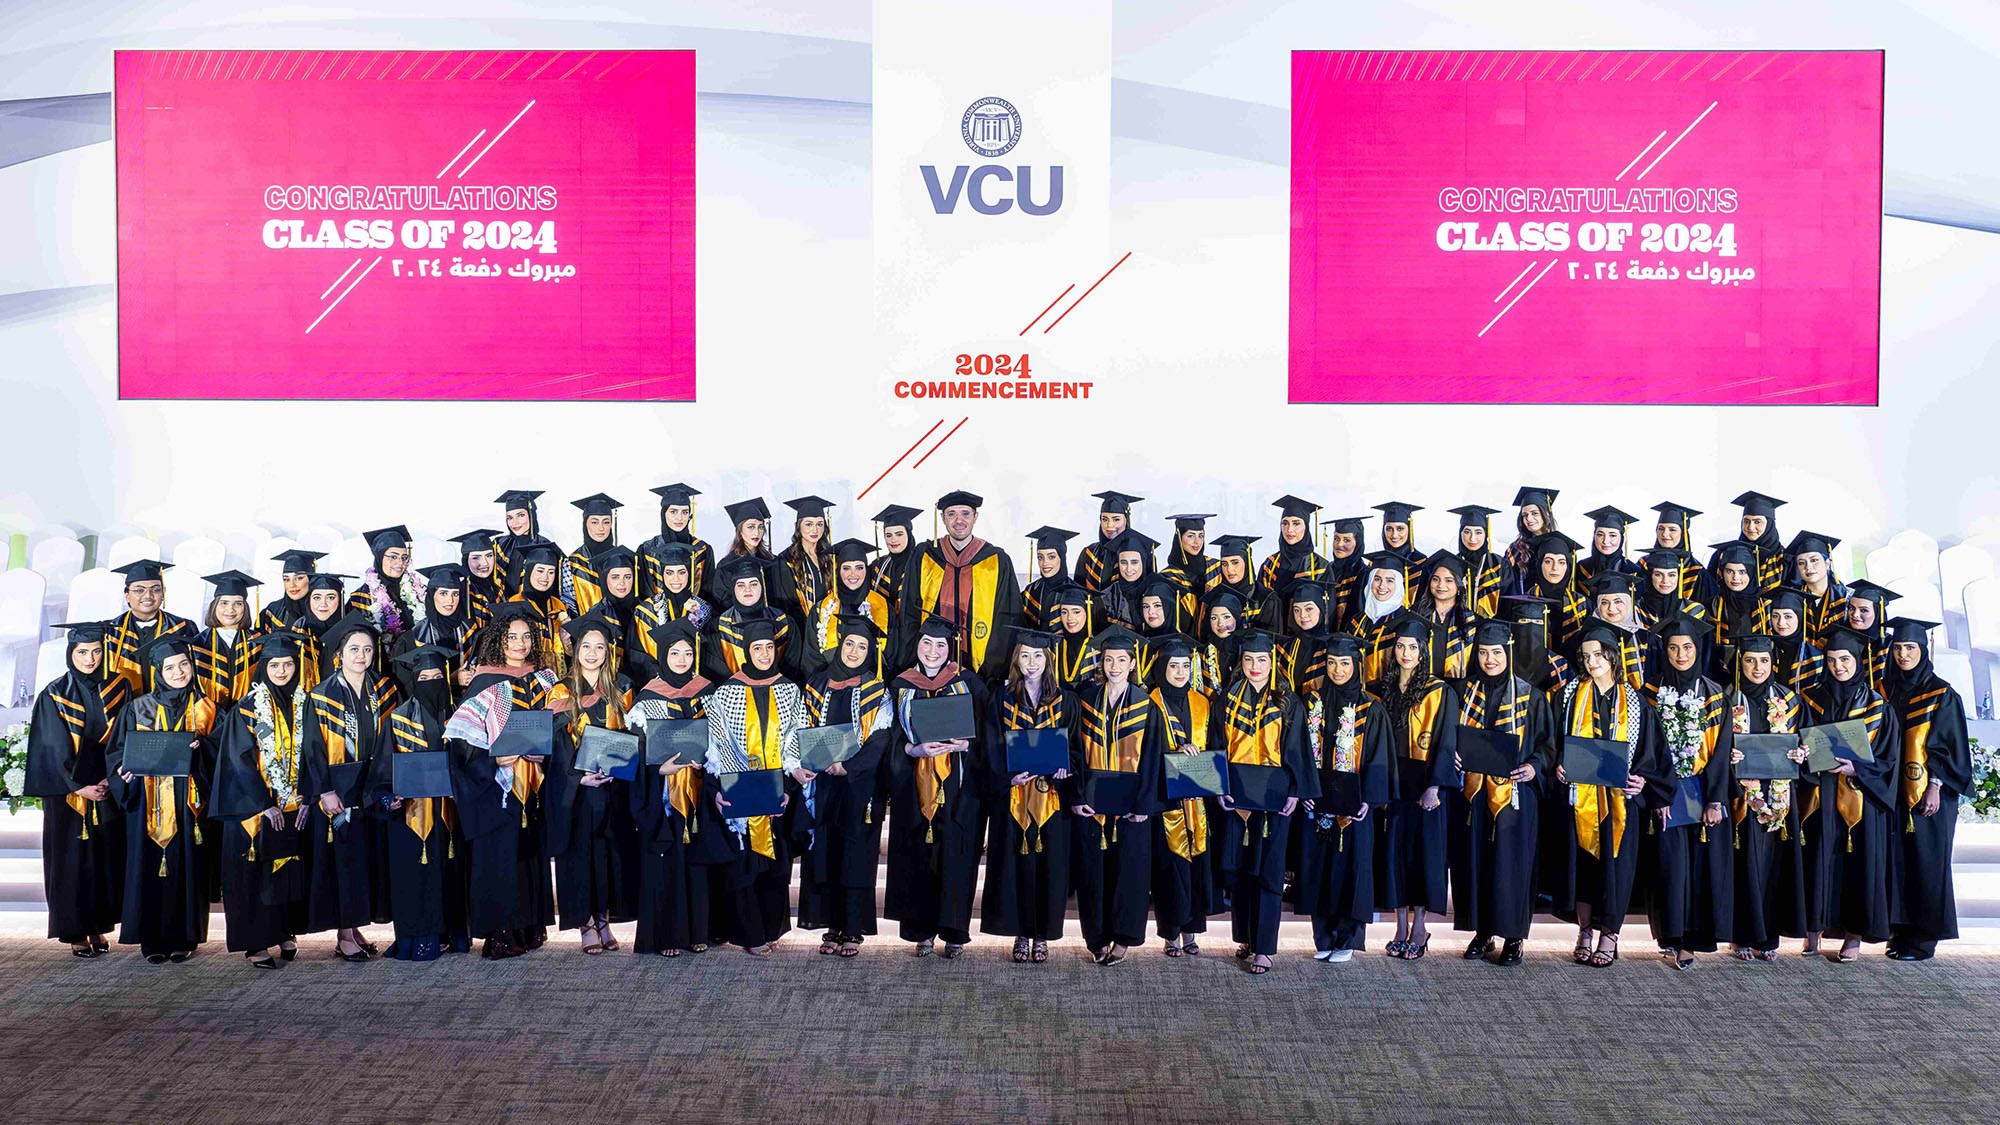 The group photo of the Class of 20 24 at the commencement